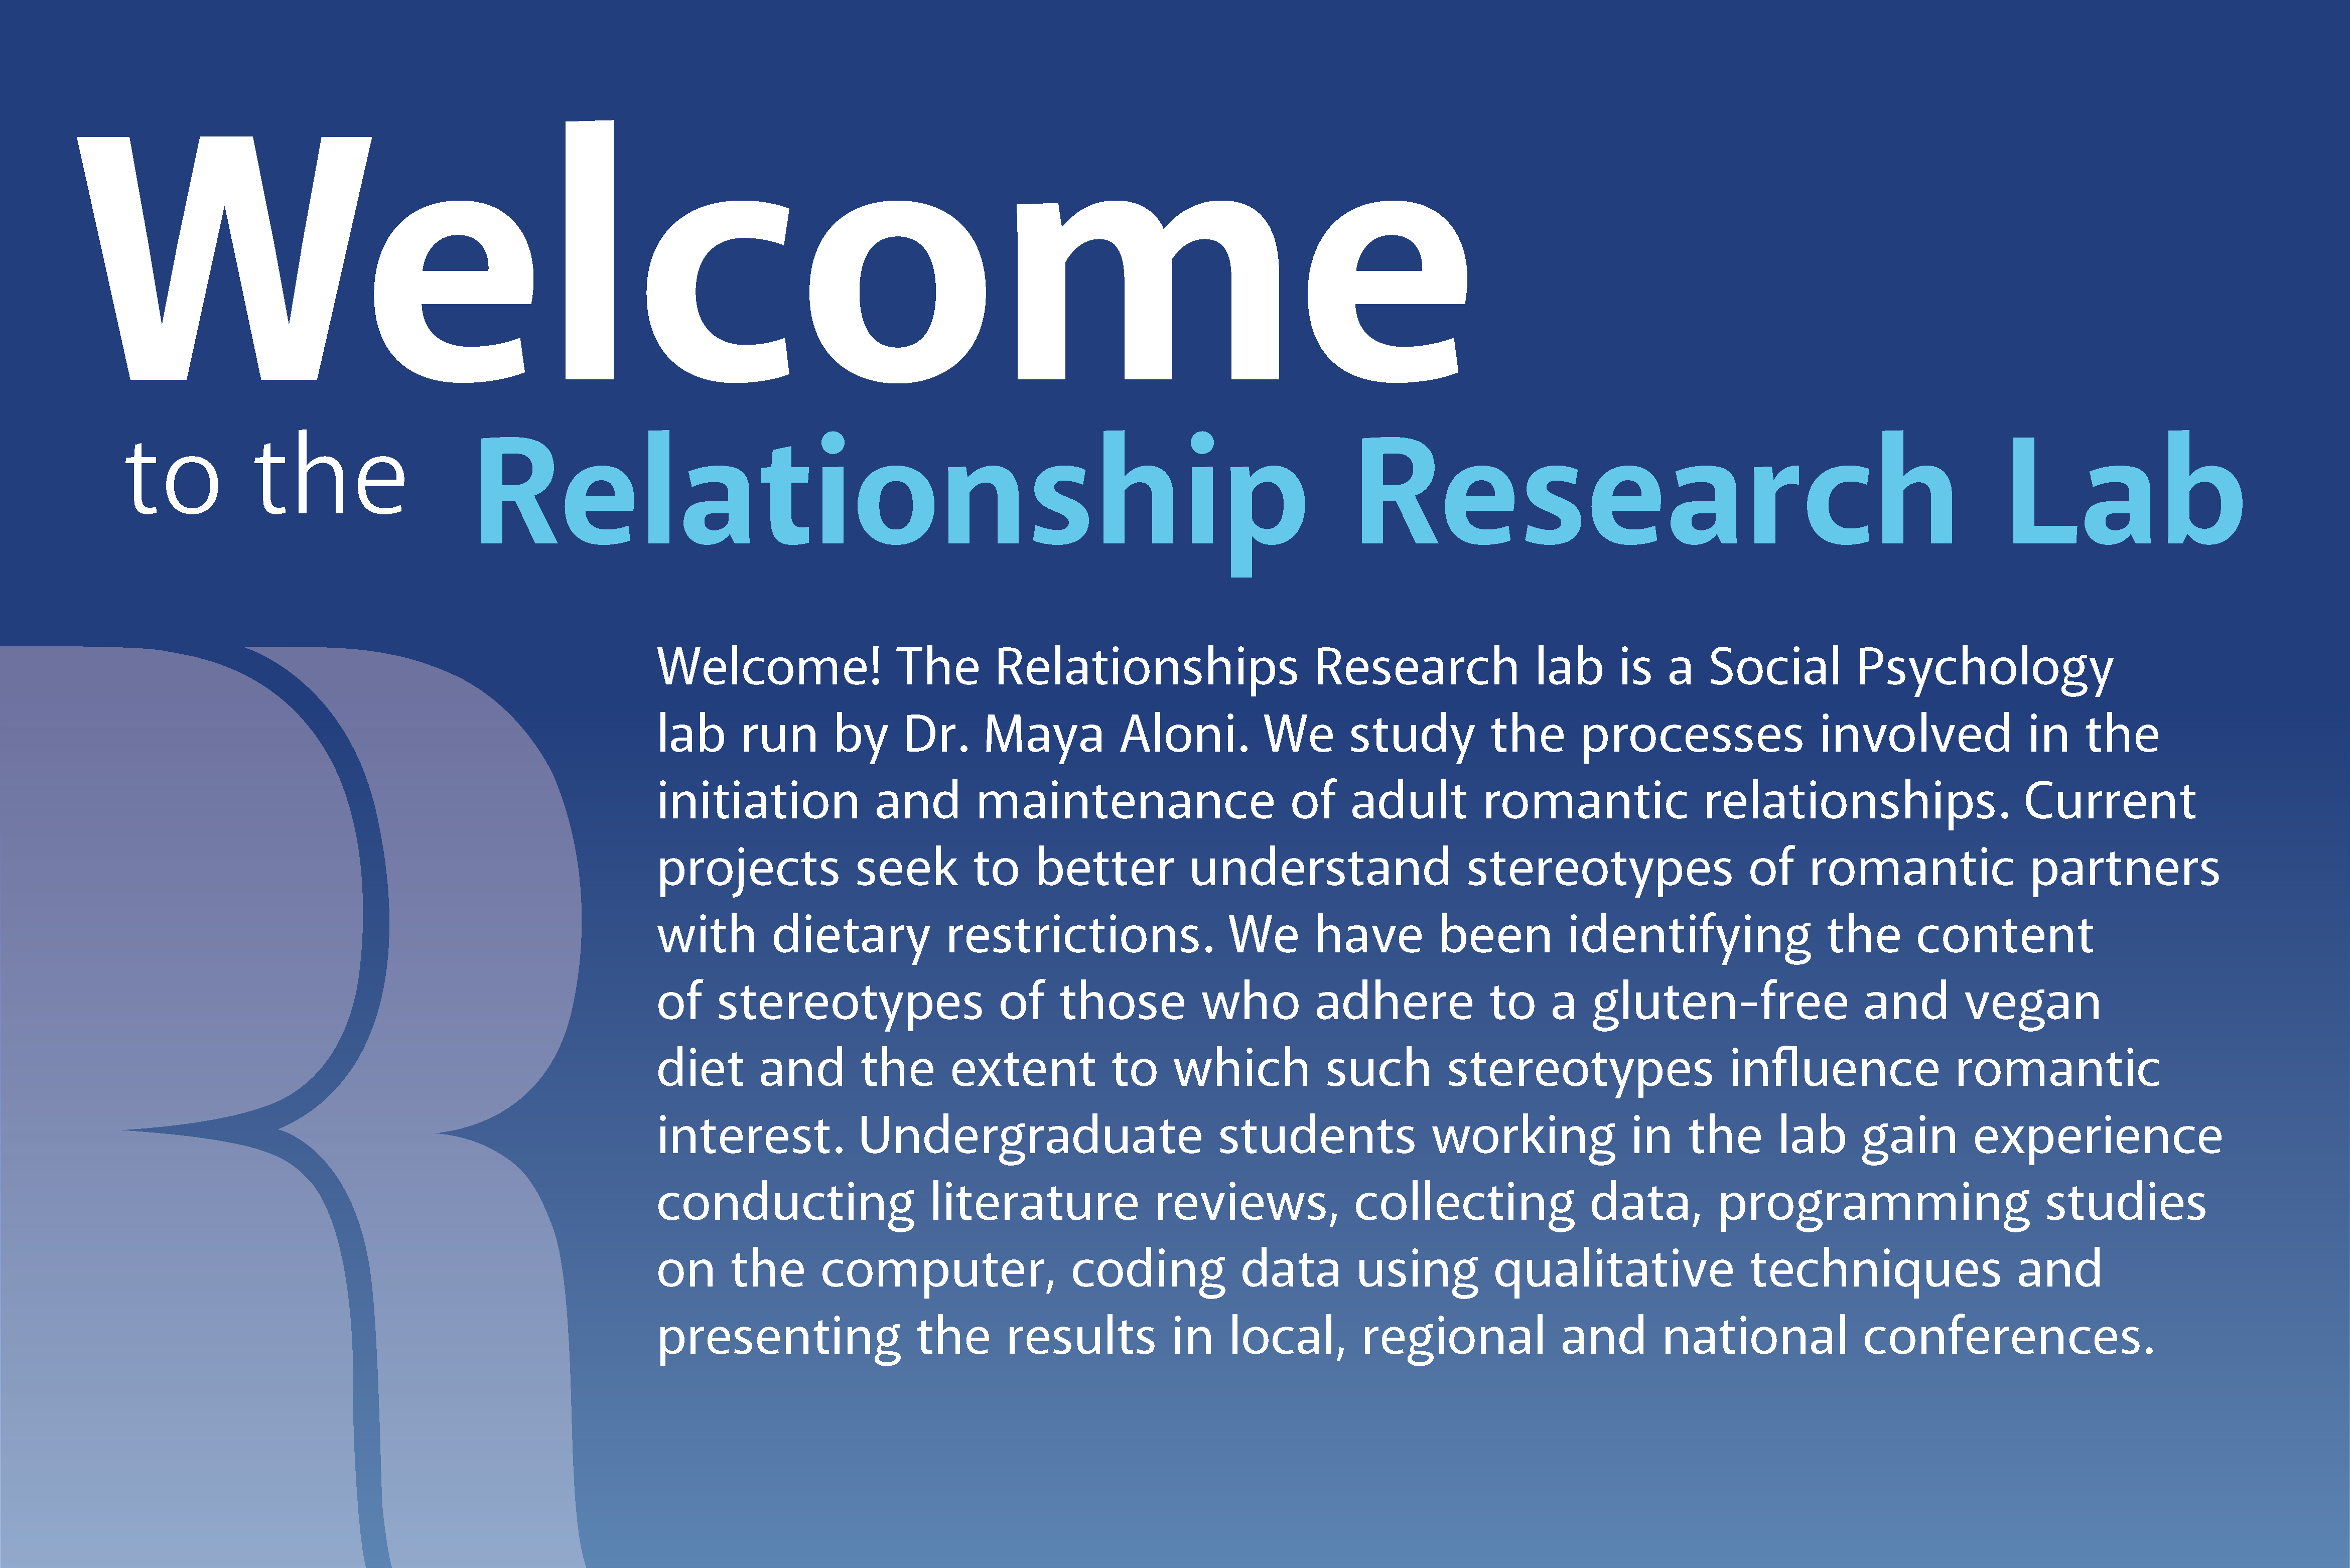 Welcome! The Relationship Research Lab is a Social Psychology lab run by Dr. Maya Aloni.